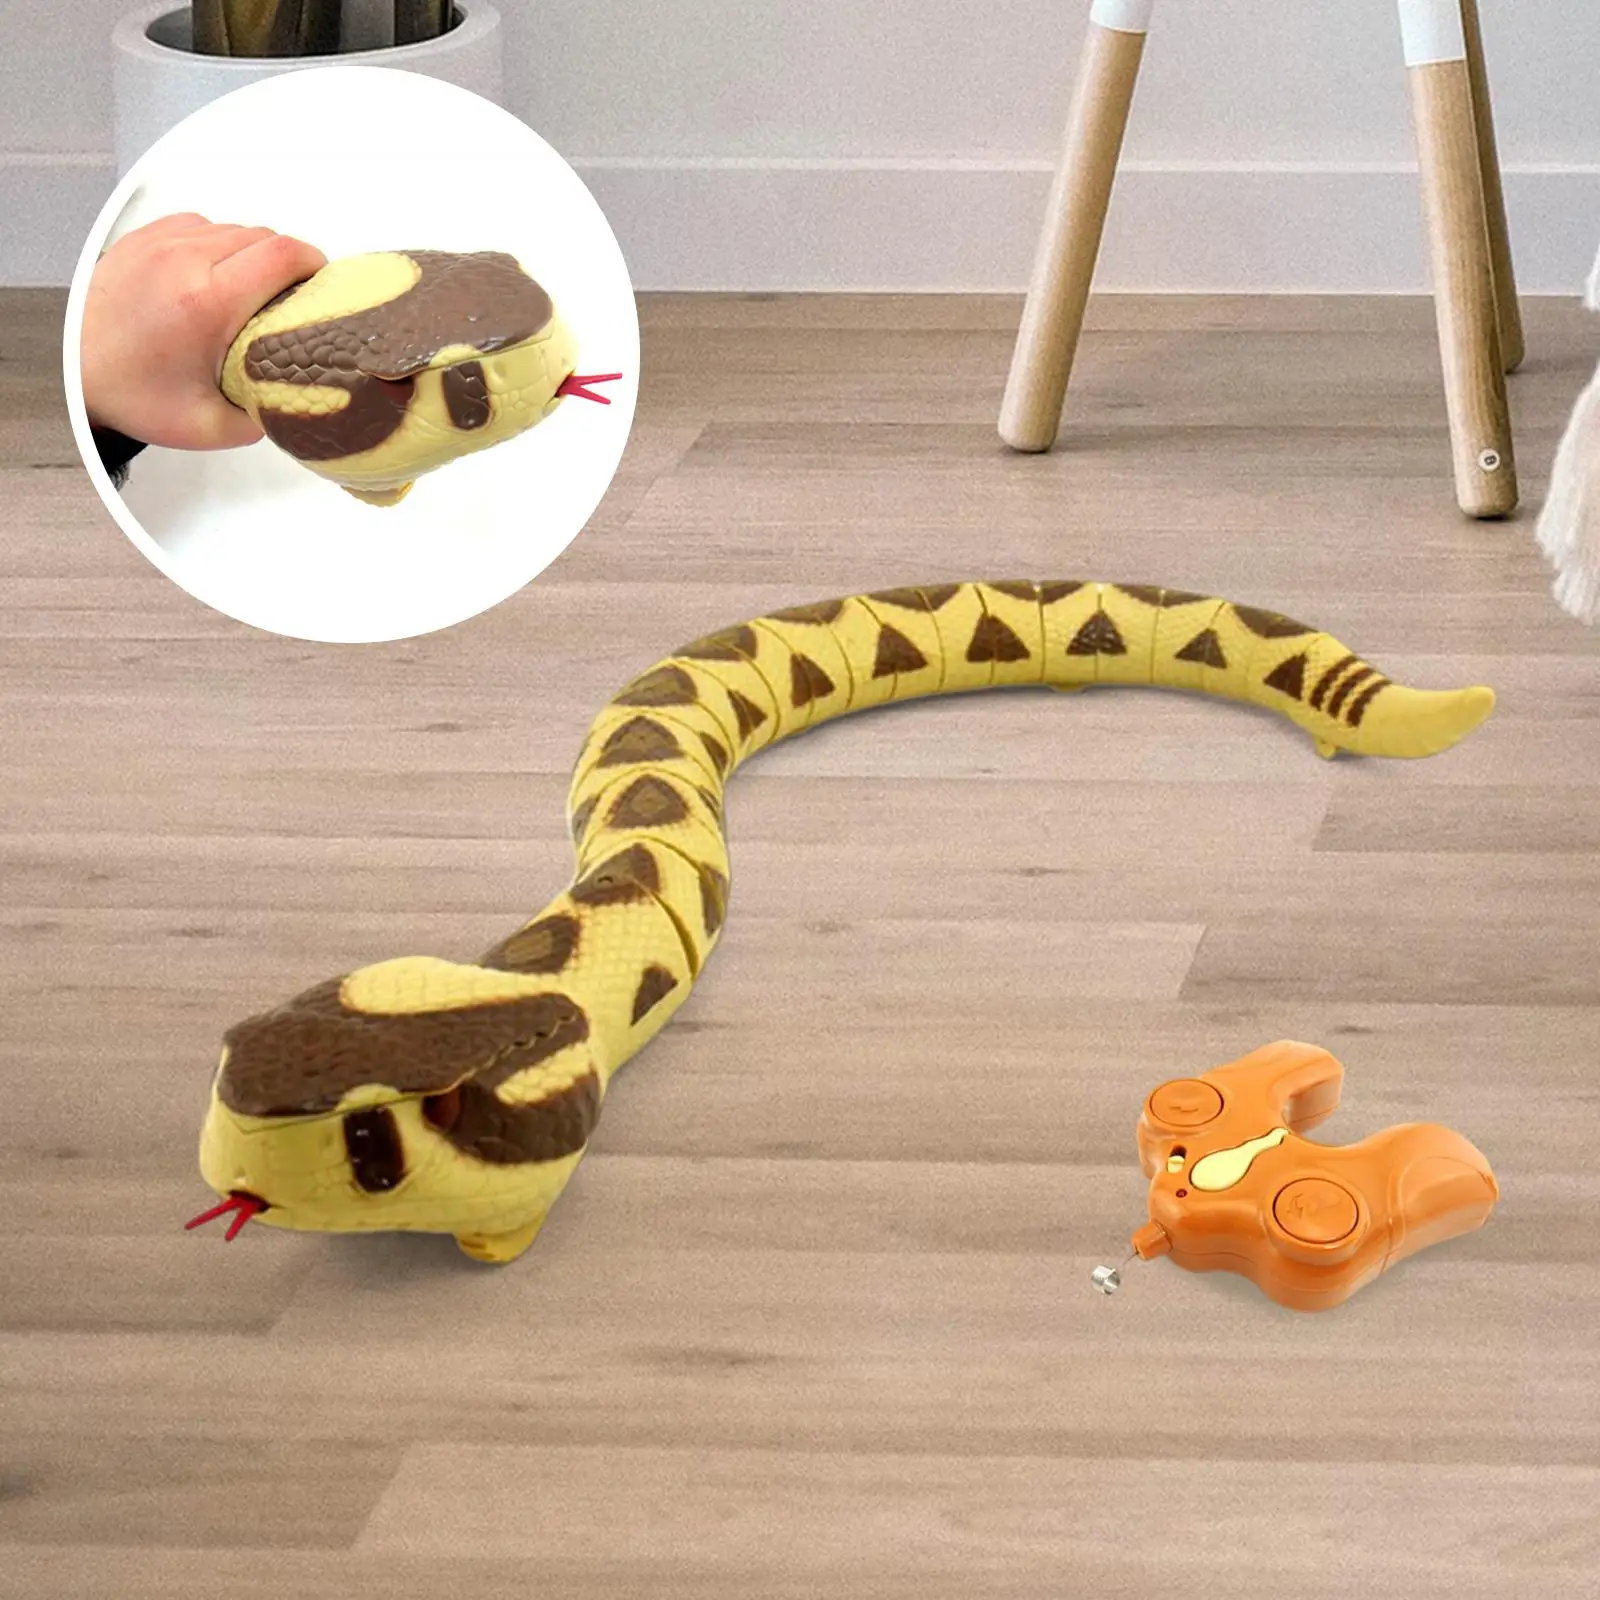 Lifelike RC Snake Toys Halloween Tricks Toy Artifical Snake Model Party Favors for Party Tricks Tabletop Decors Jokes